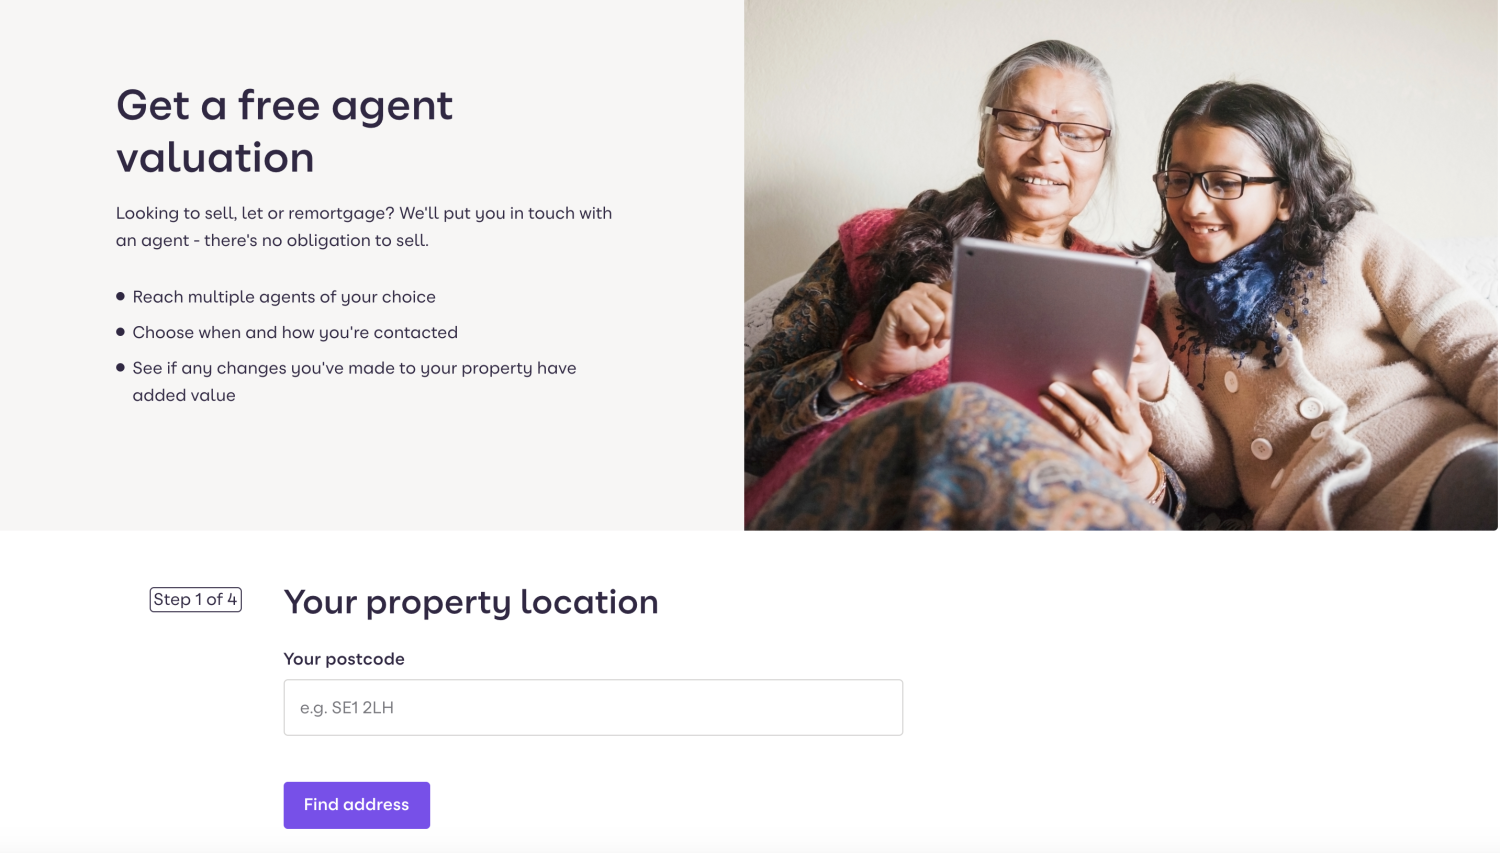 An image of a Zoopla form which allows users to request a valuation of their homes from an estate agent